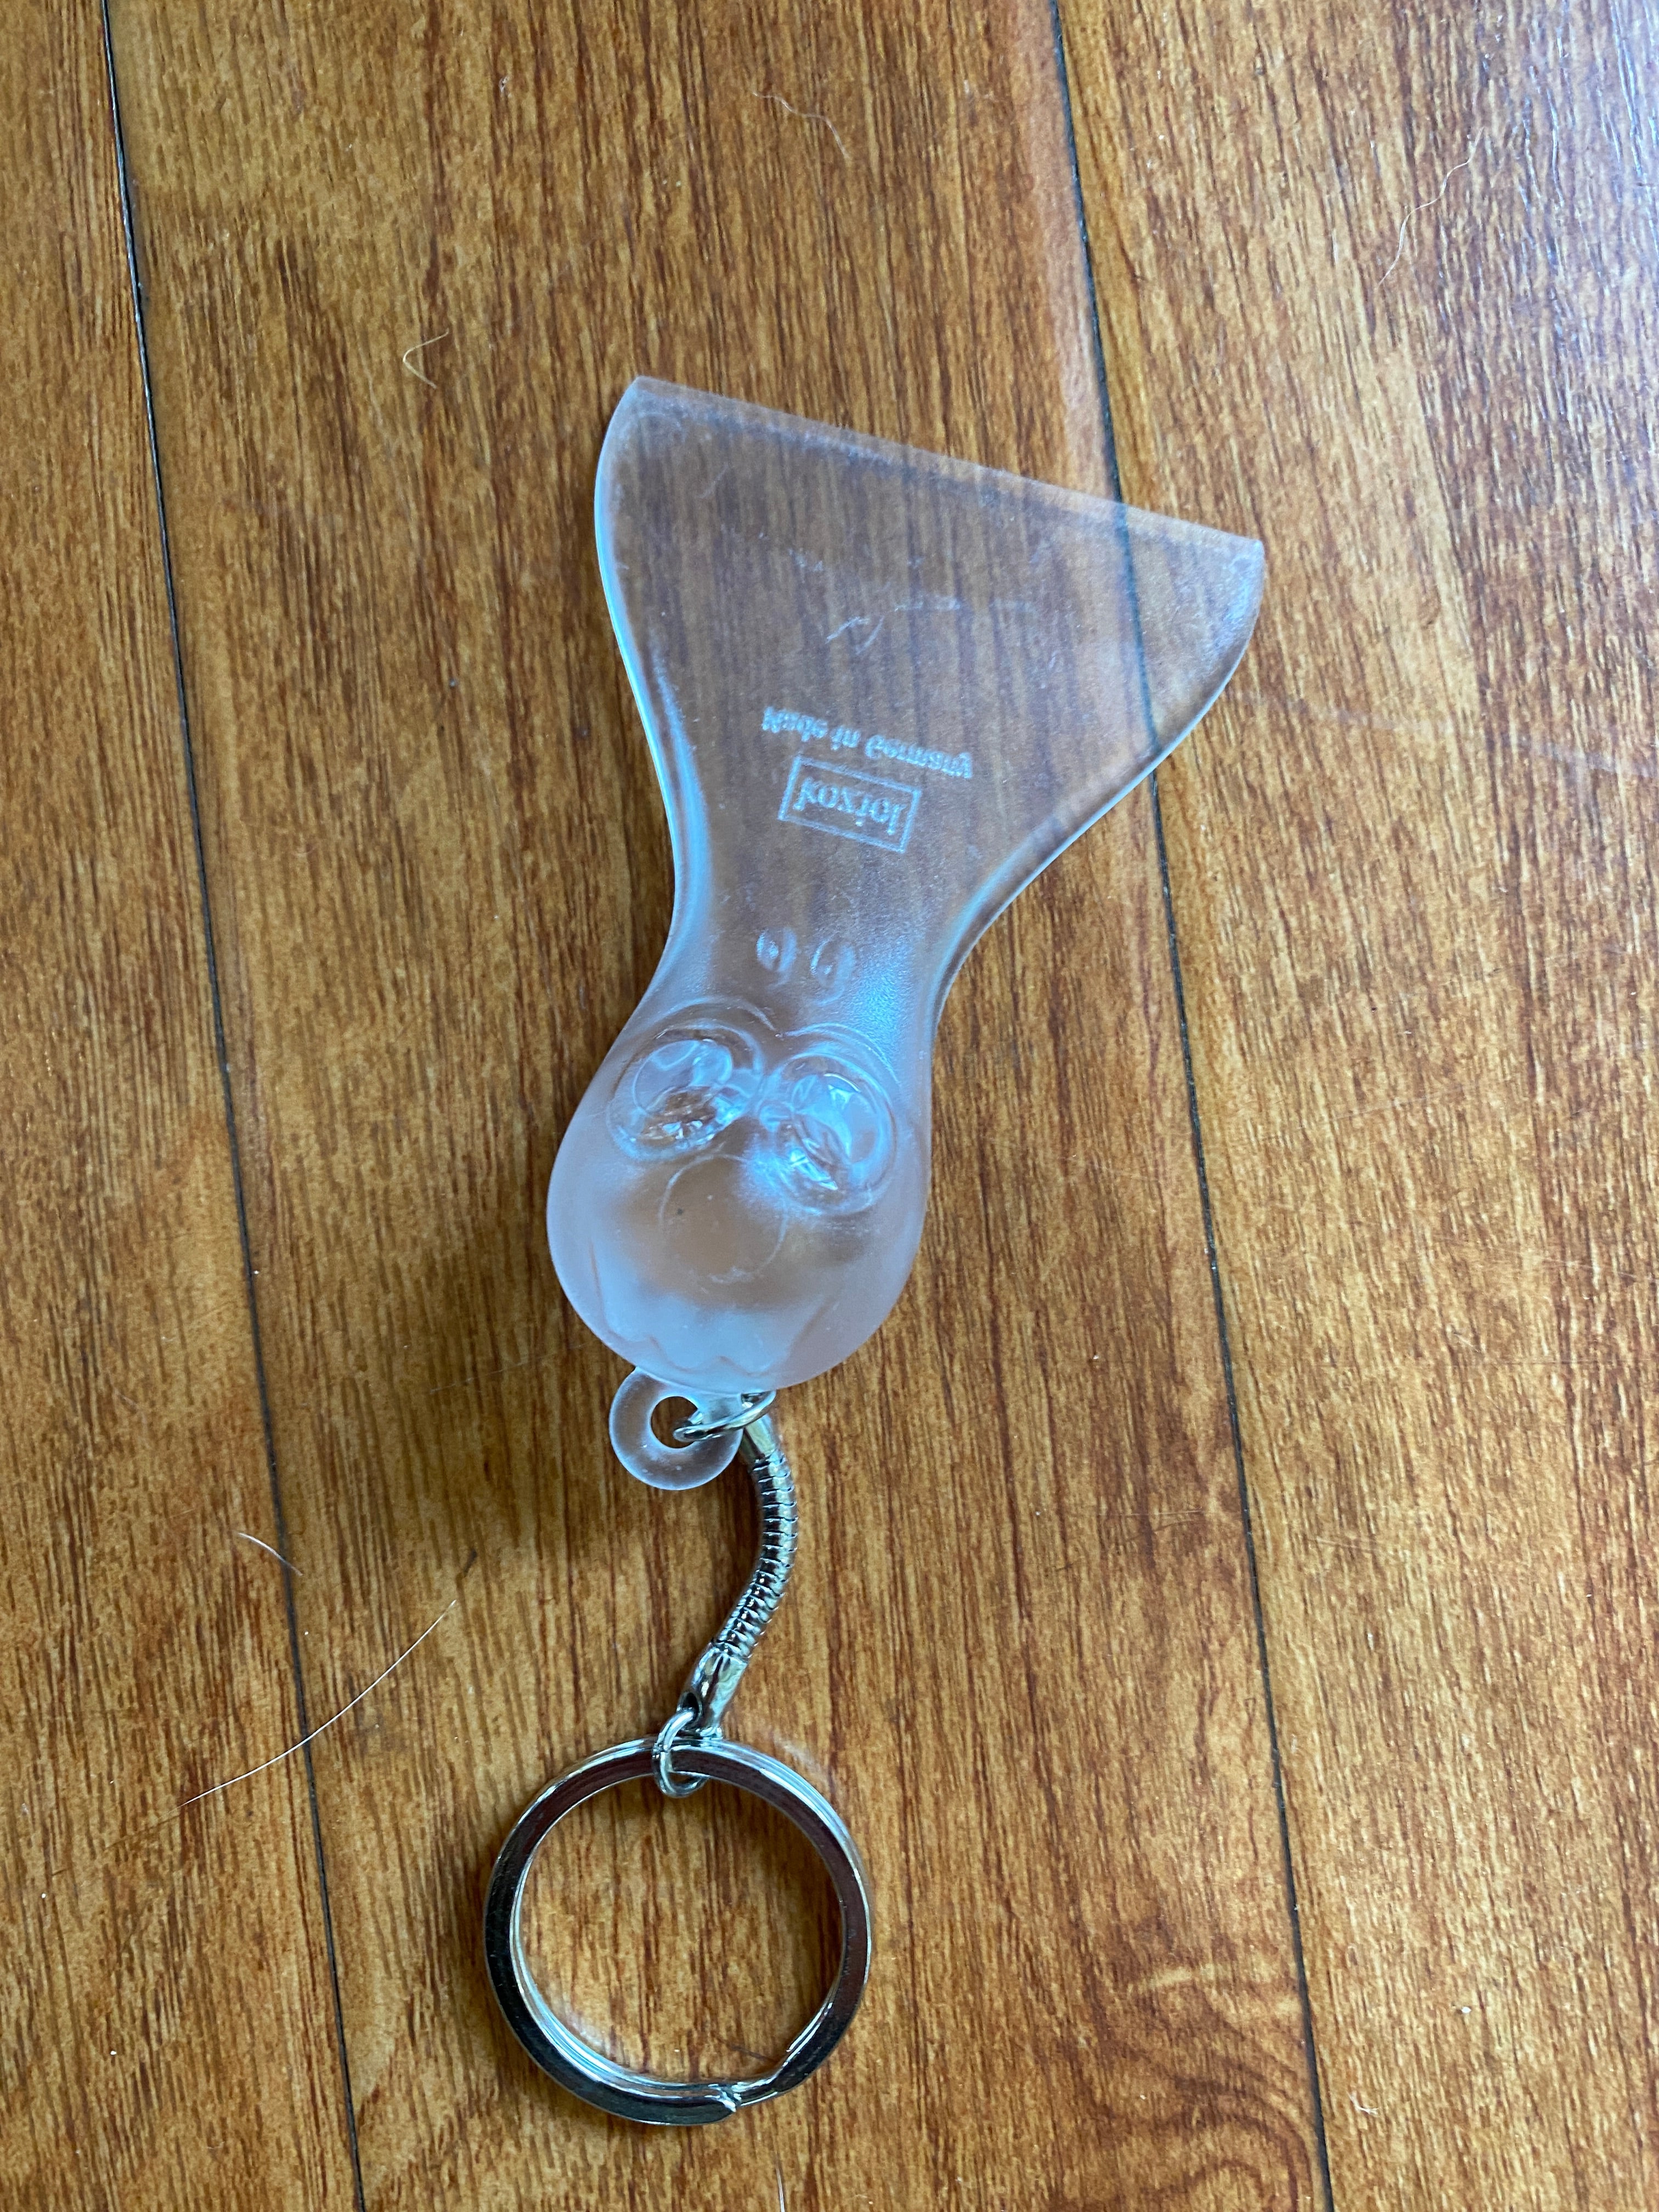 Clear Plastic 'Yeti' Mini Ice Scraper, with a large eyed face on the grip of the scraper viewed from above